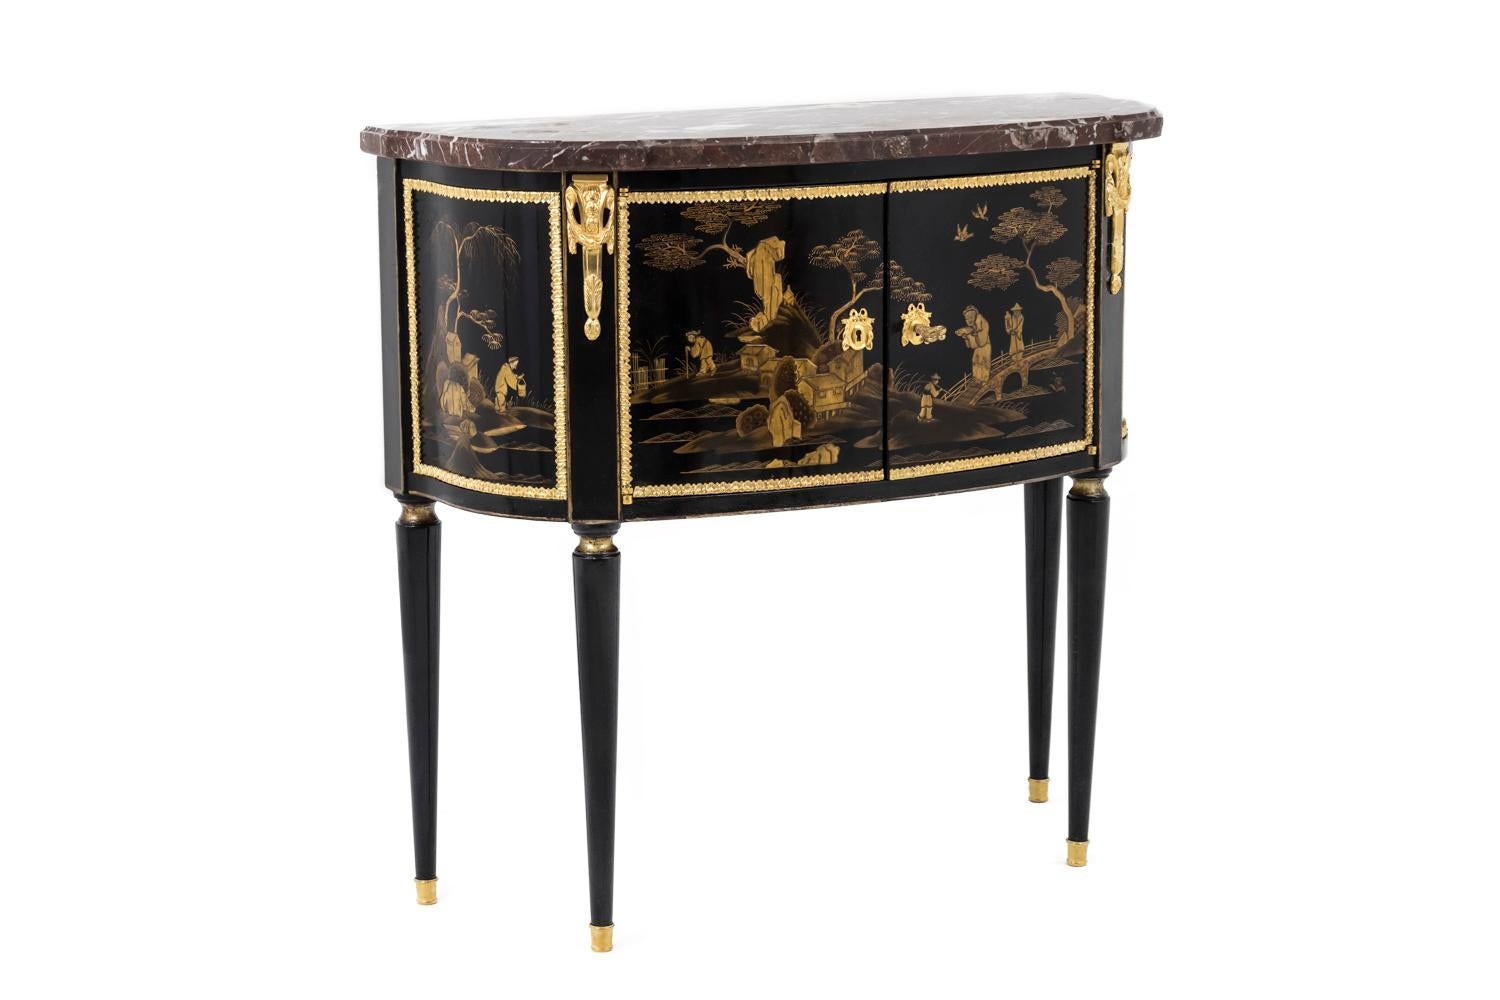 Walter Comelli, stamped.

Half-moon Louis XVI style commode in black lacquer, standing on four tapered legs and opening by two door leaves in front, discovering a red lacquered compartment. Black lacquer adorned with gold Chinese style motifs on